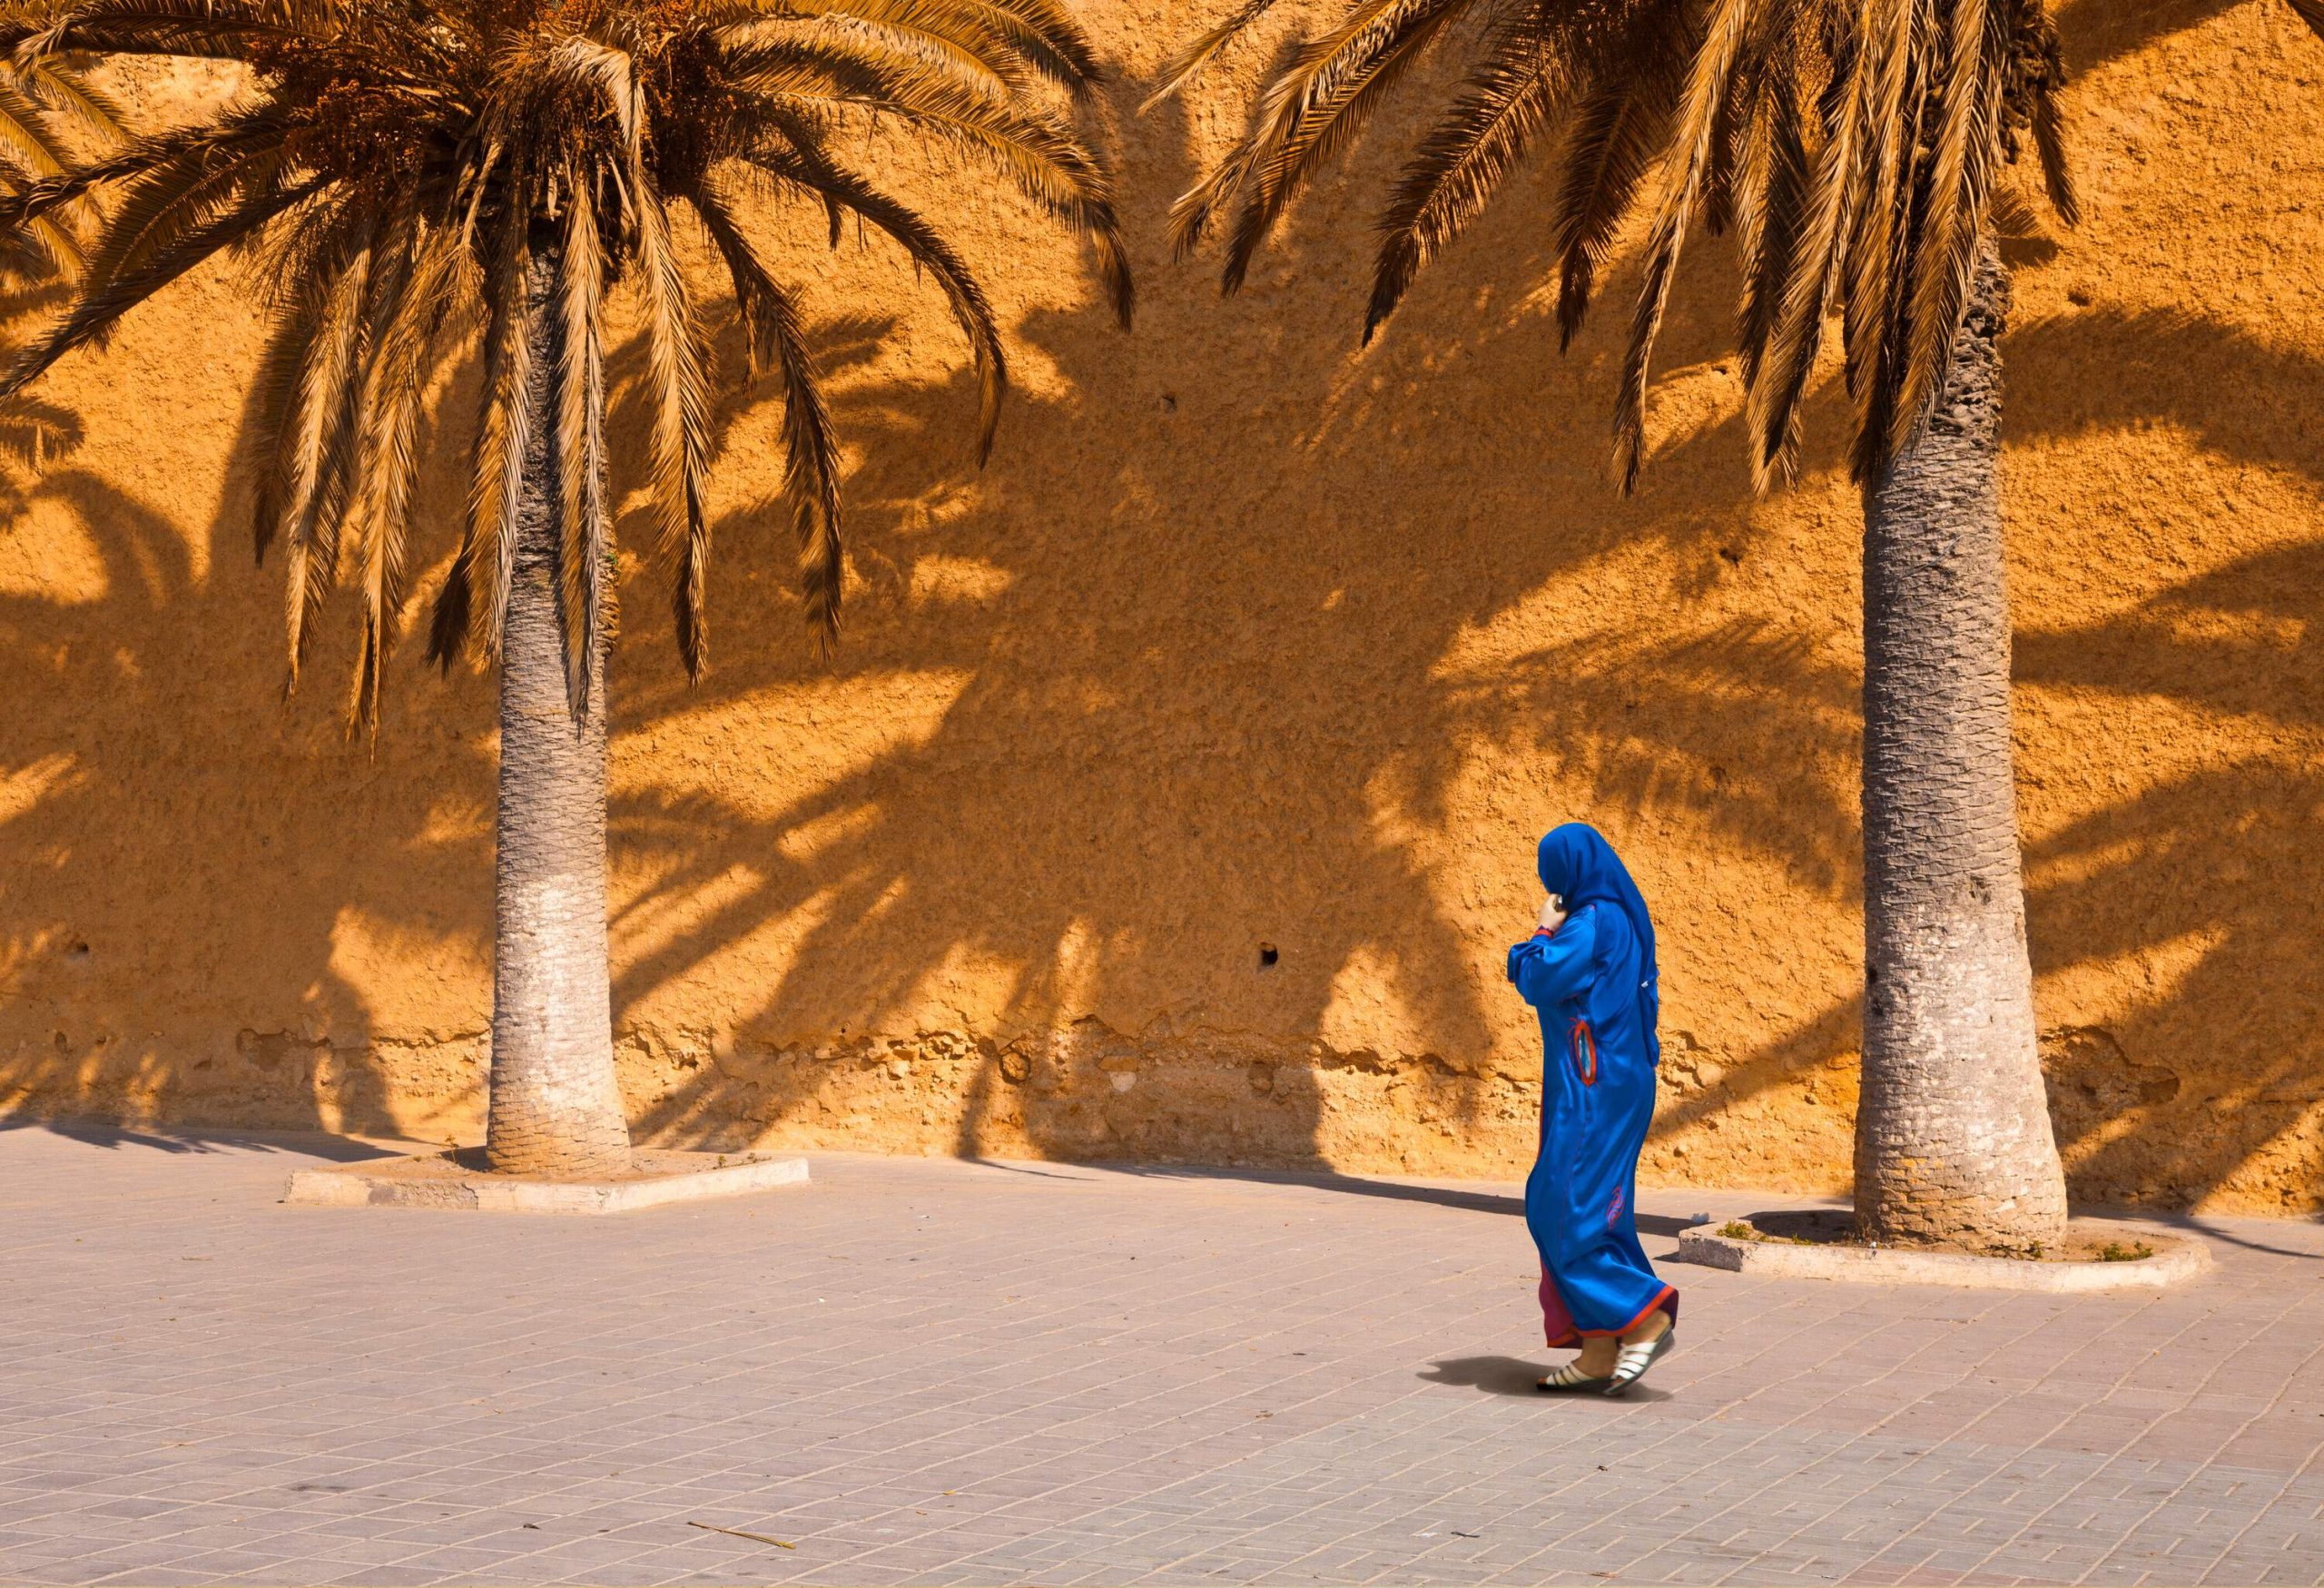 A person in a blue hooded robe walks along palm trees and a building with a mud wall.